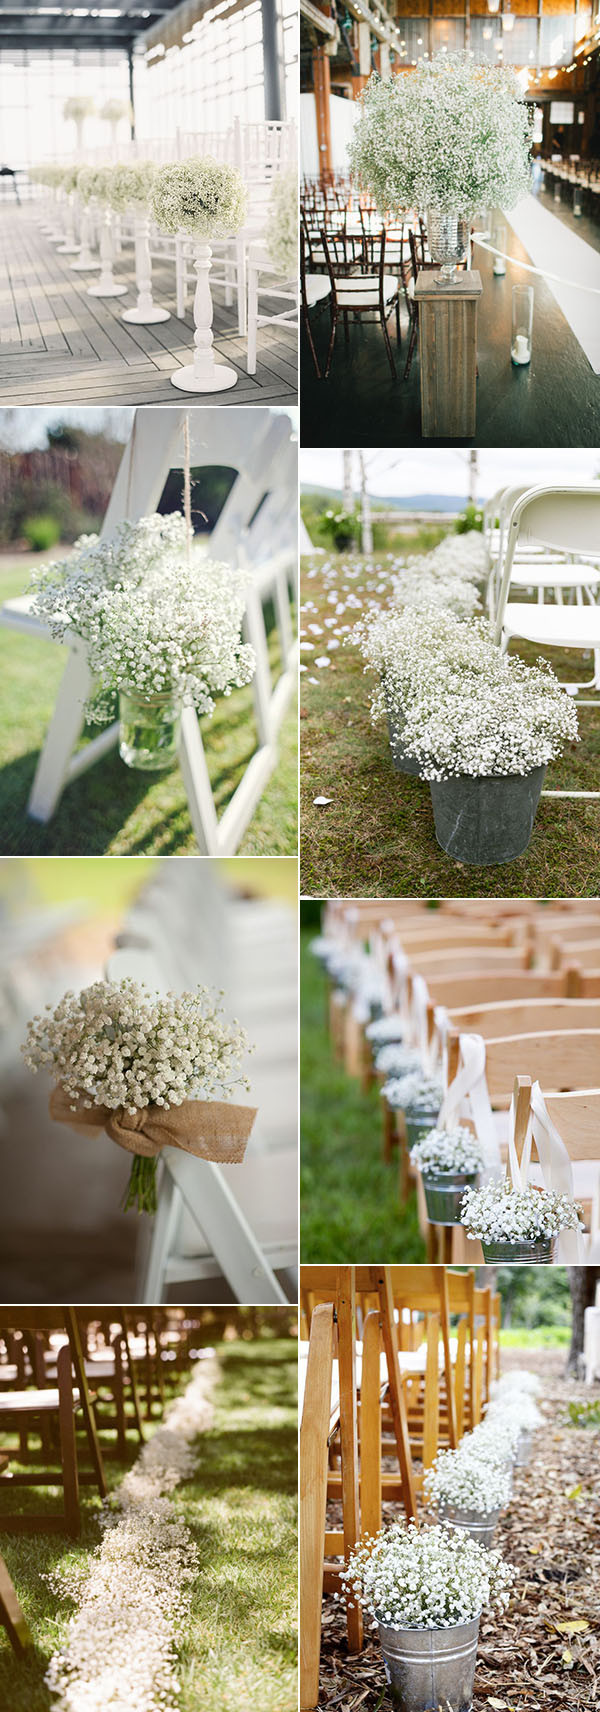 Aisle Decorations For Wedding
 Wedding Flowers 40 Ideas to Use Baby’s Breath